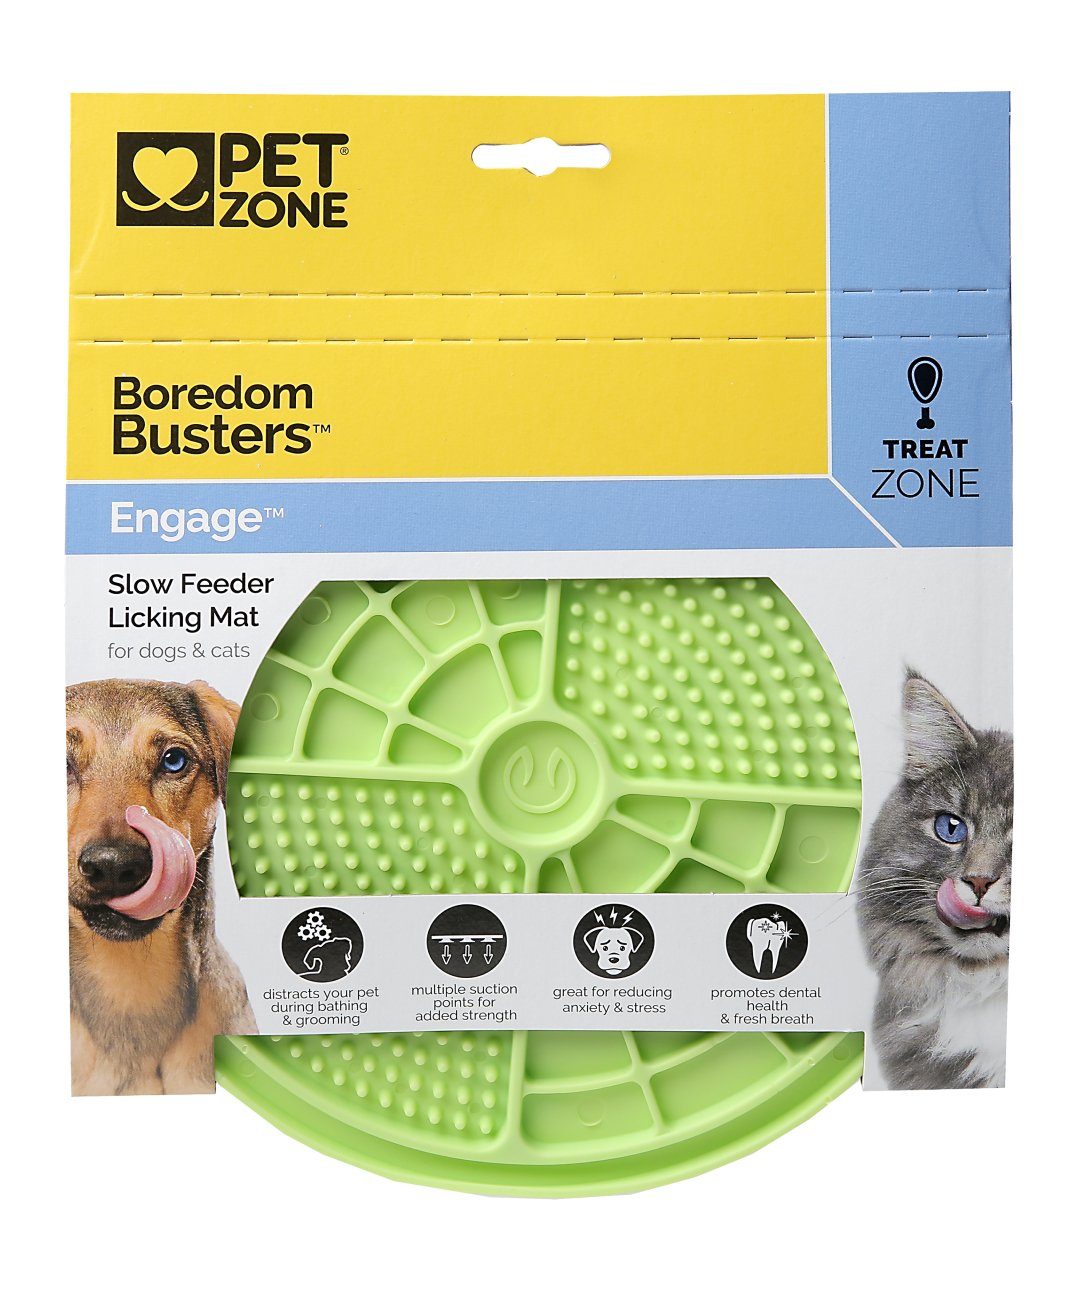 Dog Boredom Busters